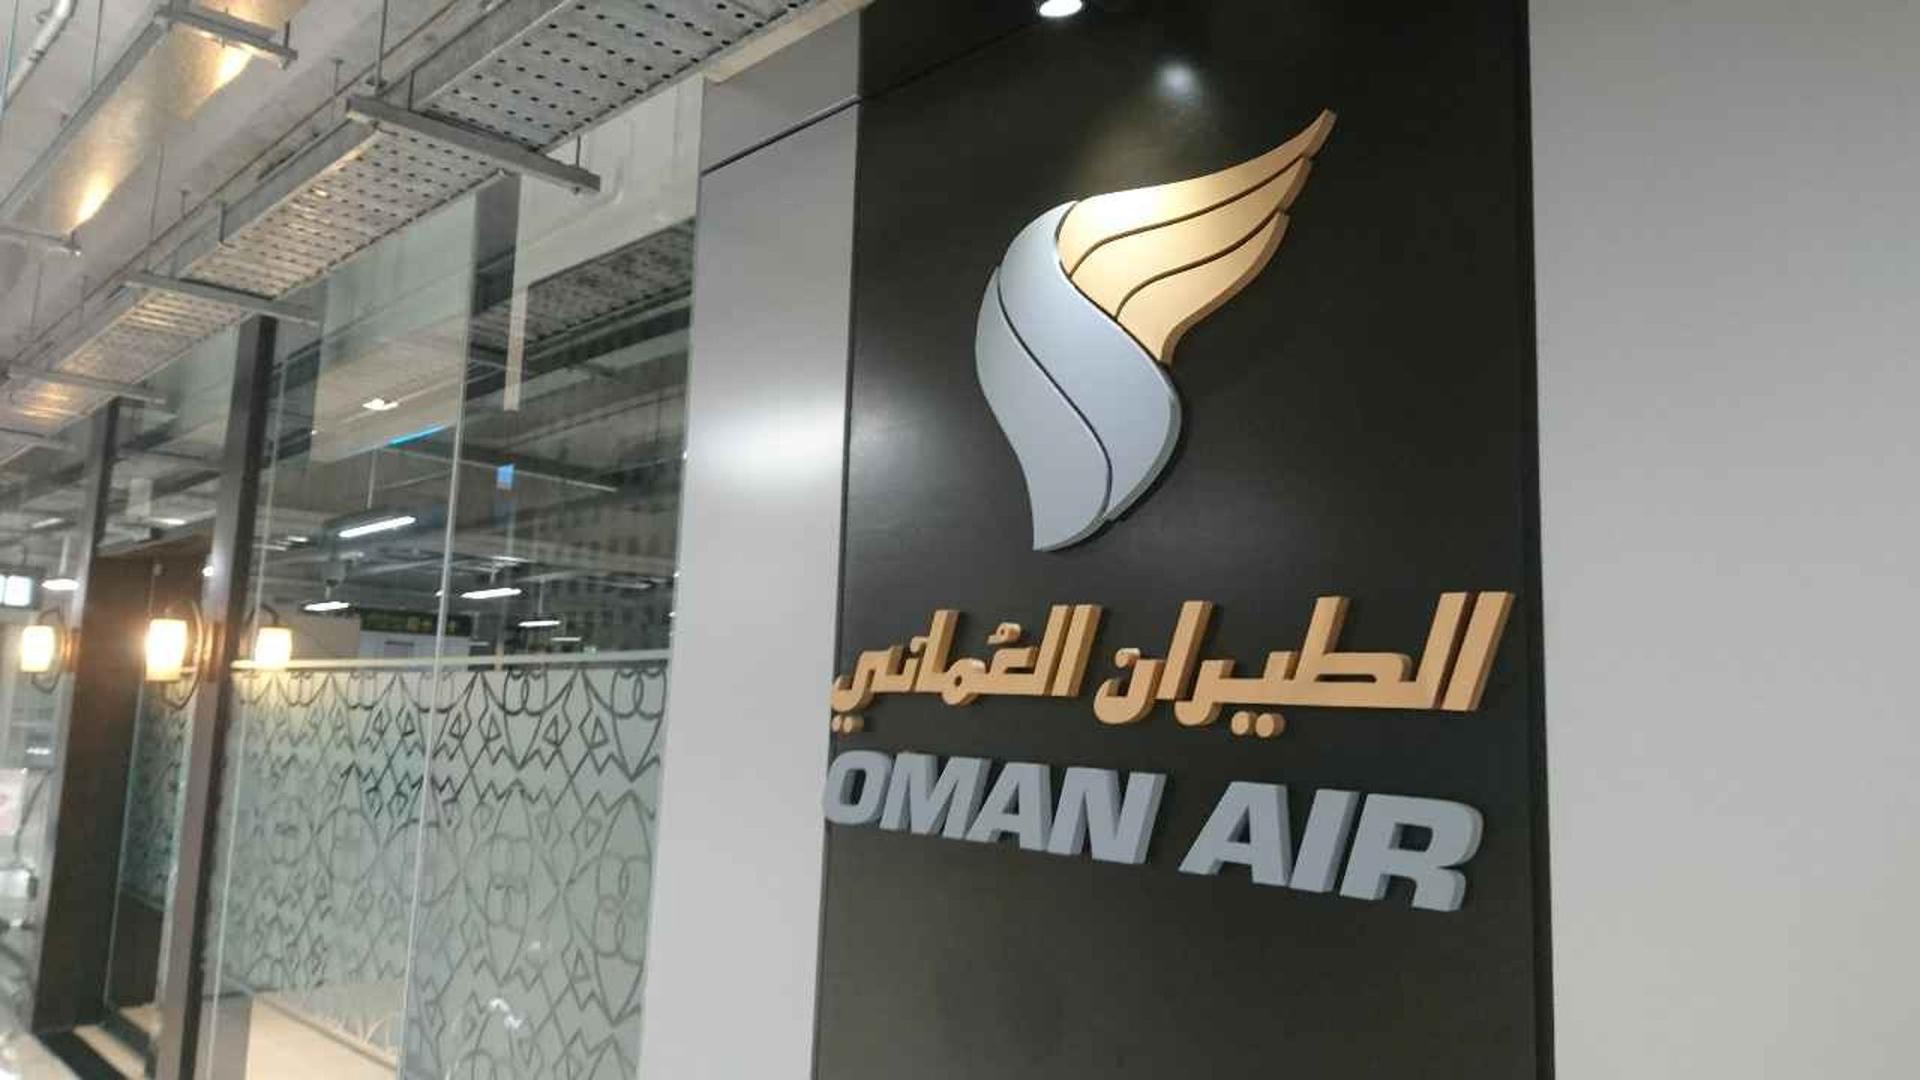 Oman Air First and Business Class Lounge image 28 of 50